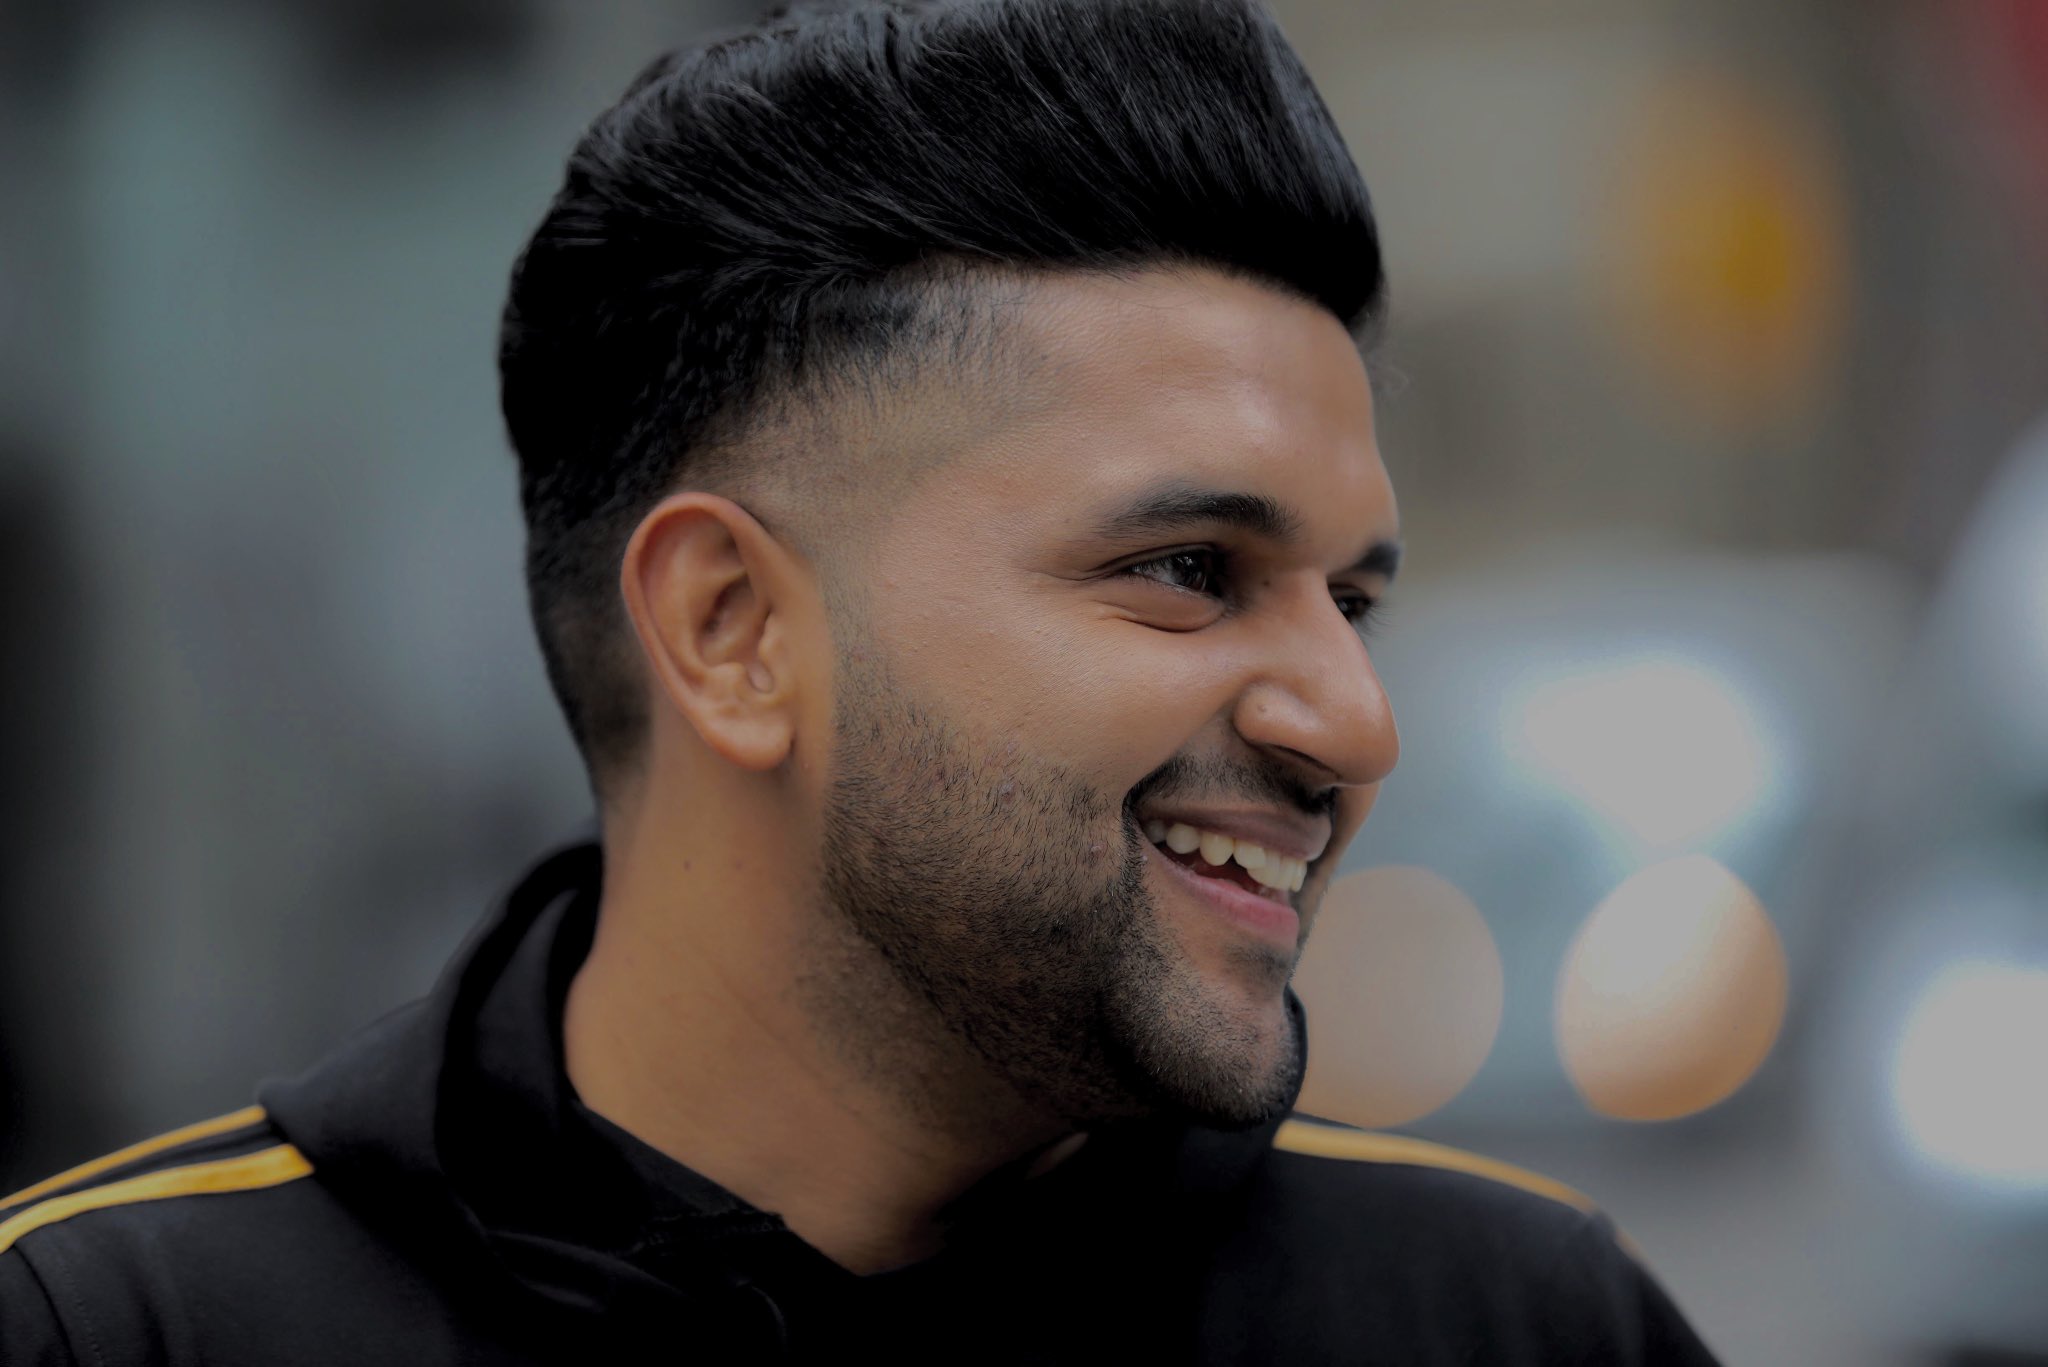 Popular Punjabi singer says he was punched following Vancouver concert |  CBC News